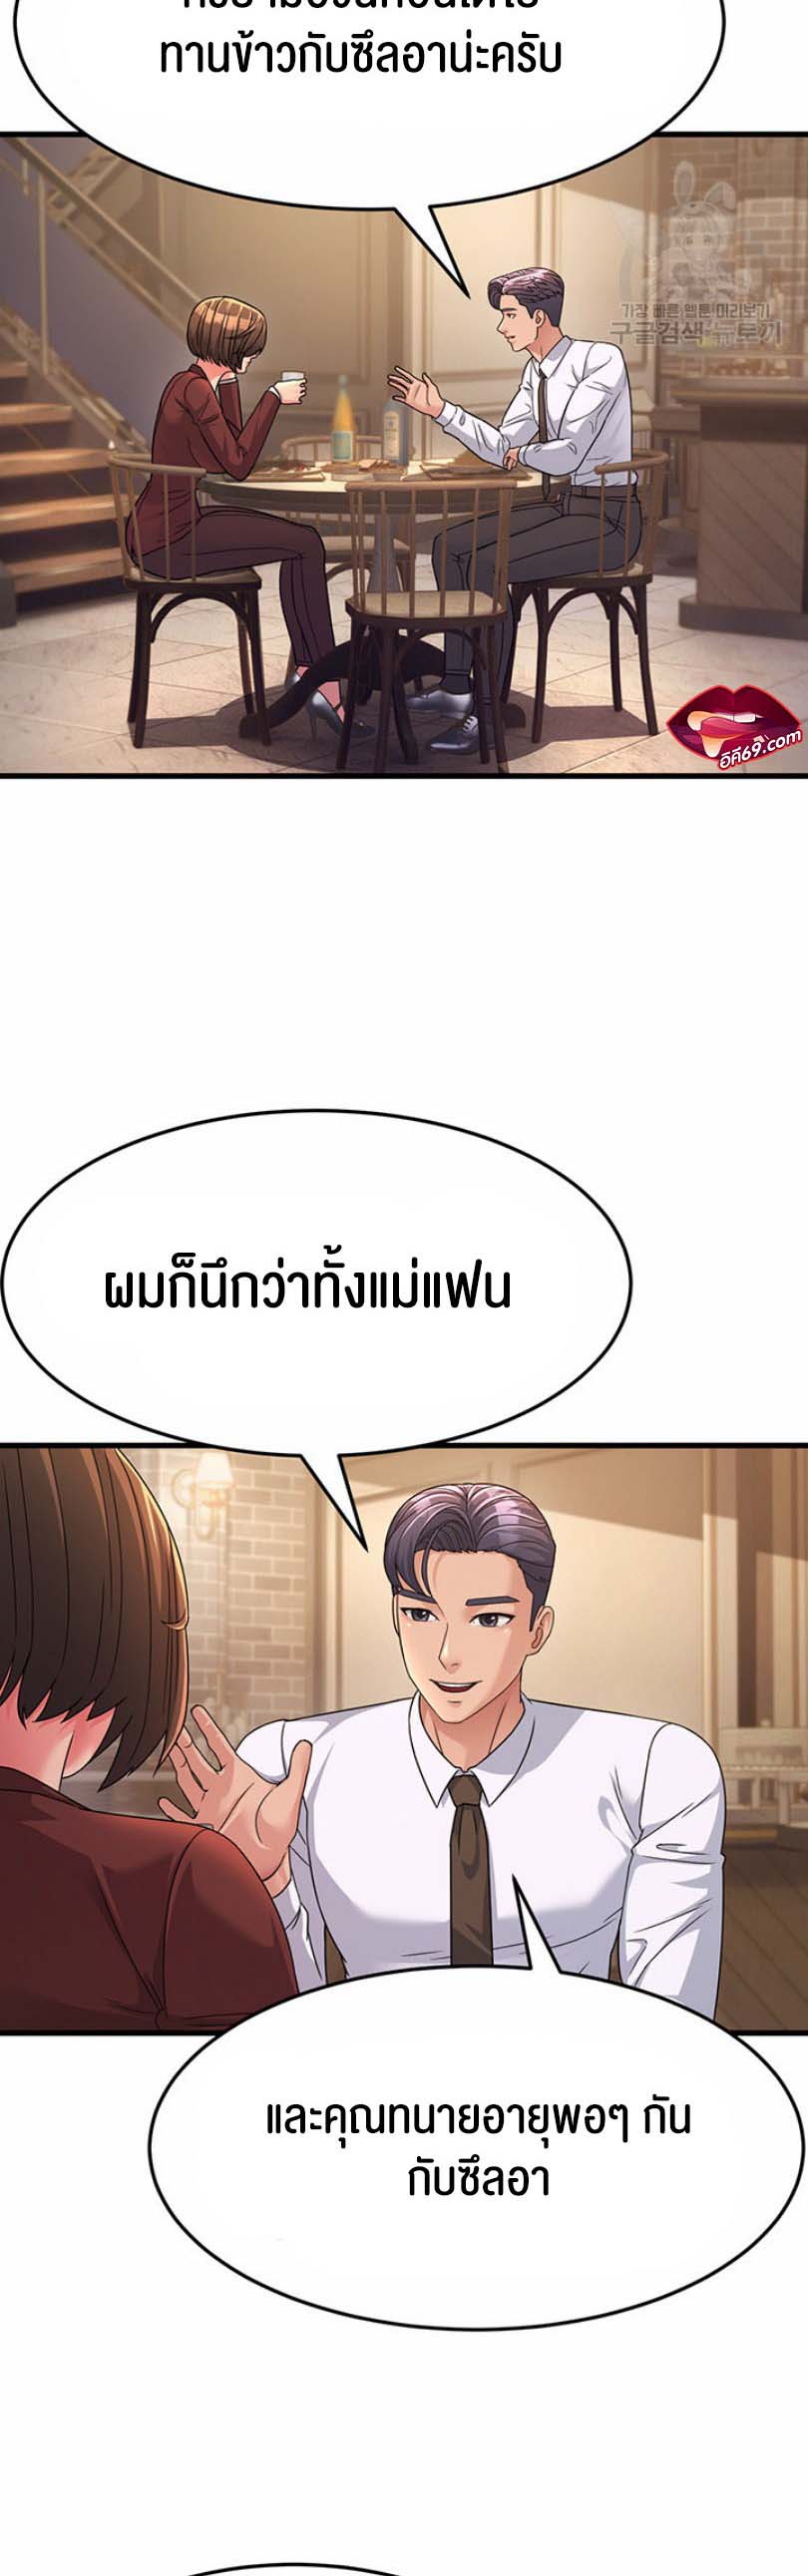 à¸­à¹ˆà¸²à¸™à¹‚à¸”à¸ˆà¸´à¸™ à¹€à¸£à¸·à¹ˆà¸­à¸‡ Mother in Law Bends To My Will 9 20